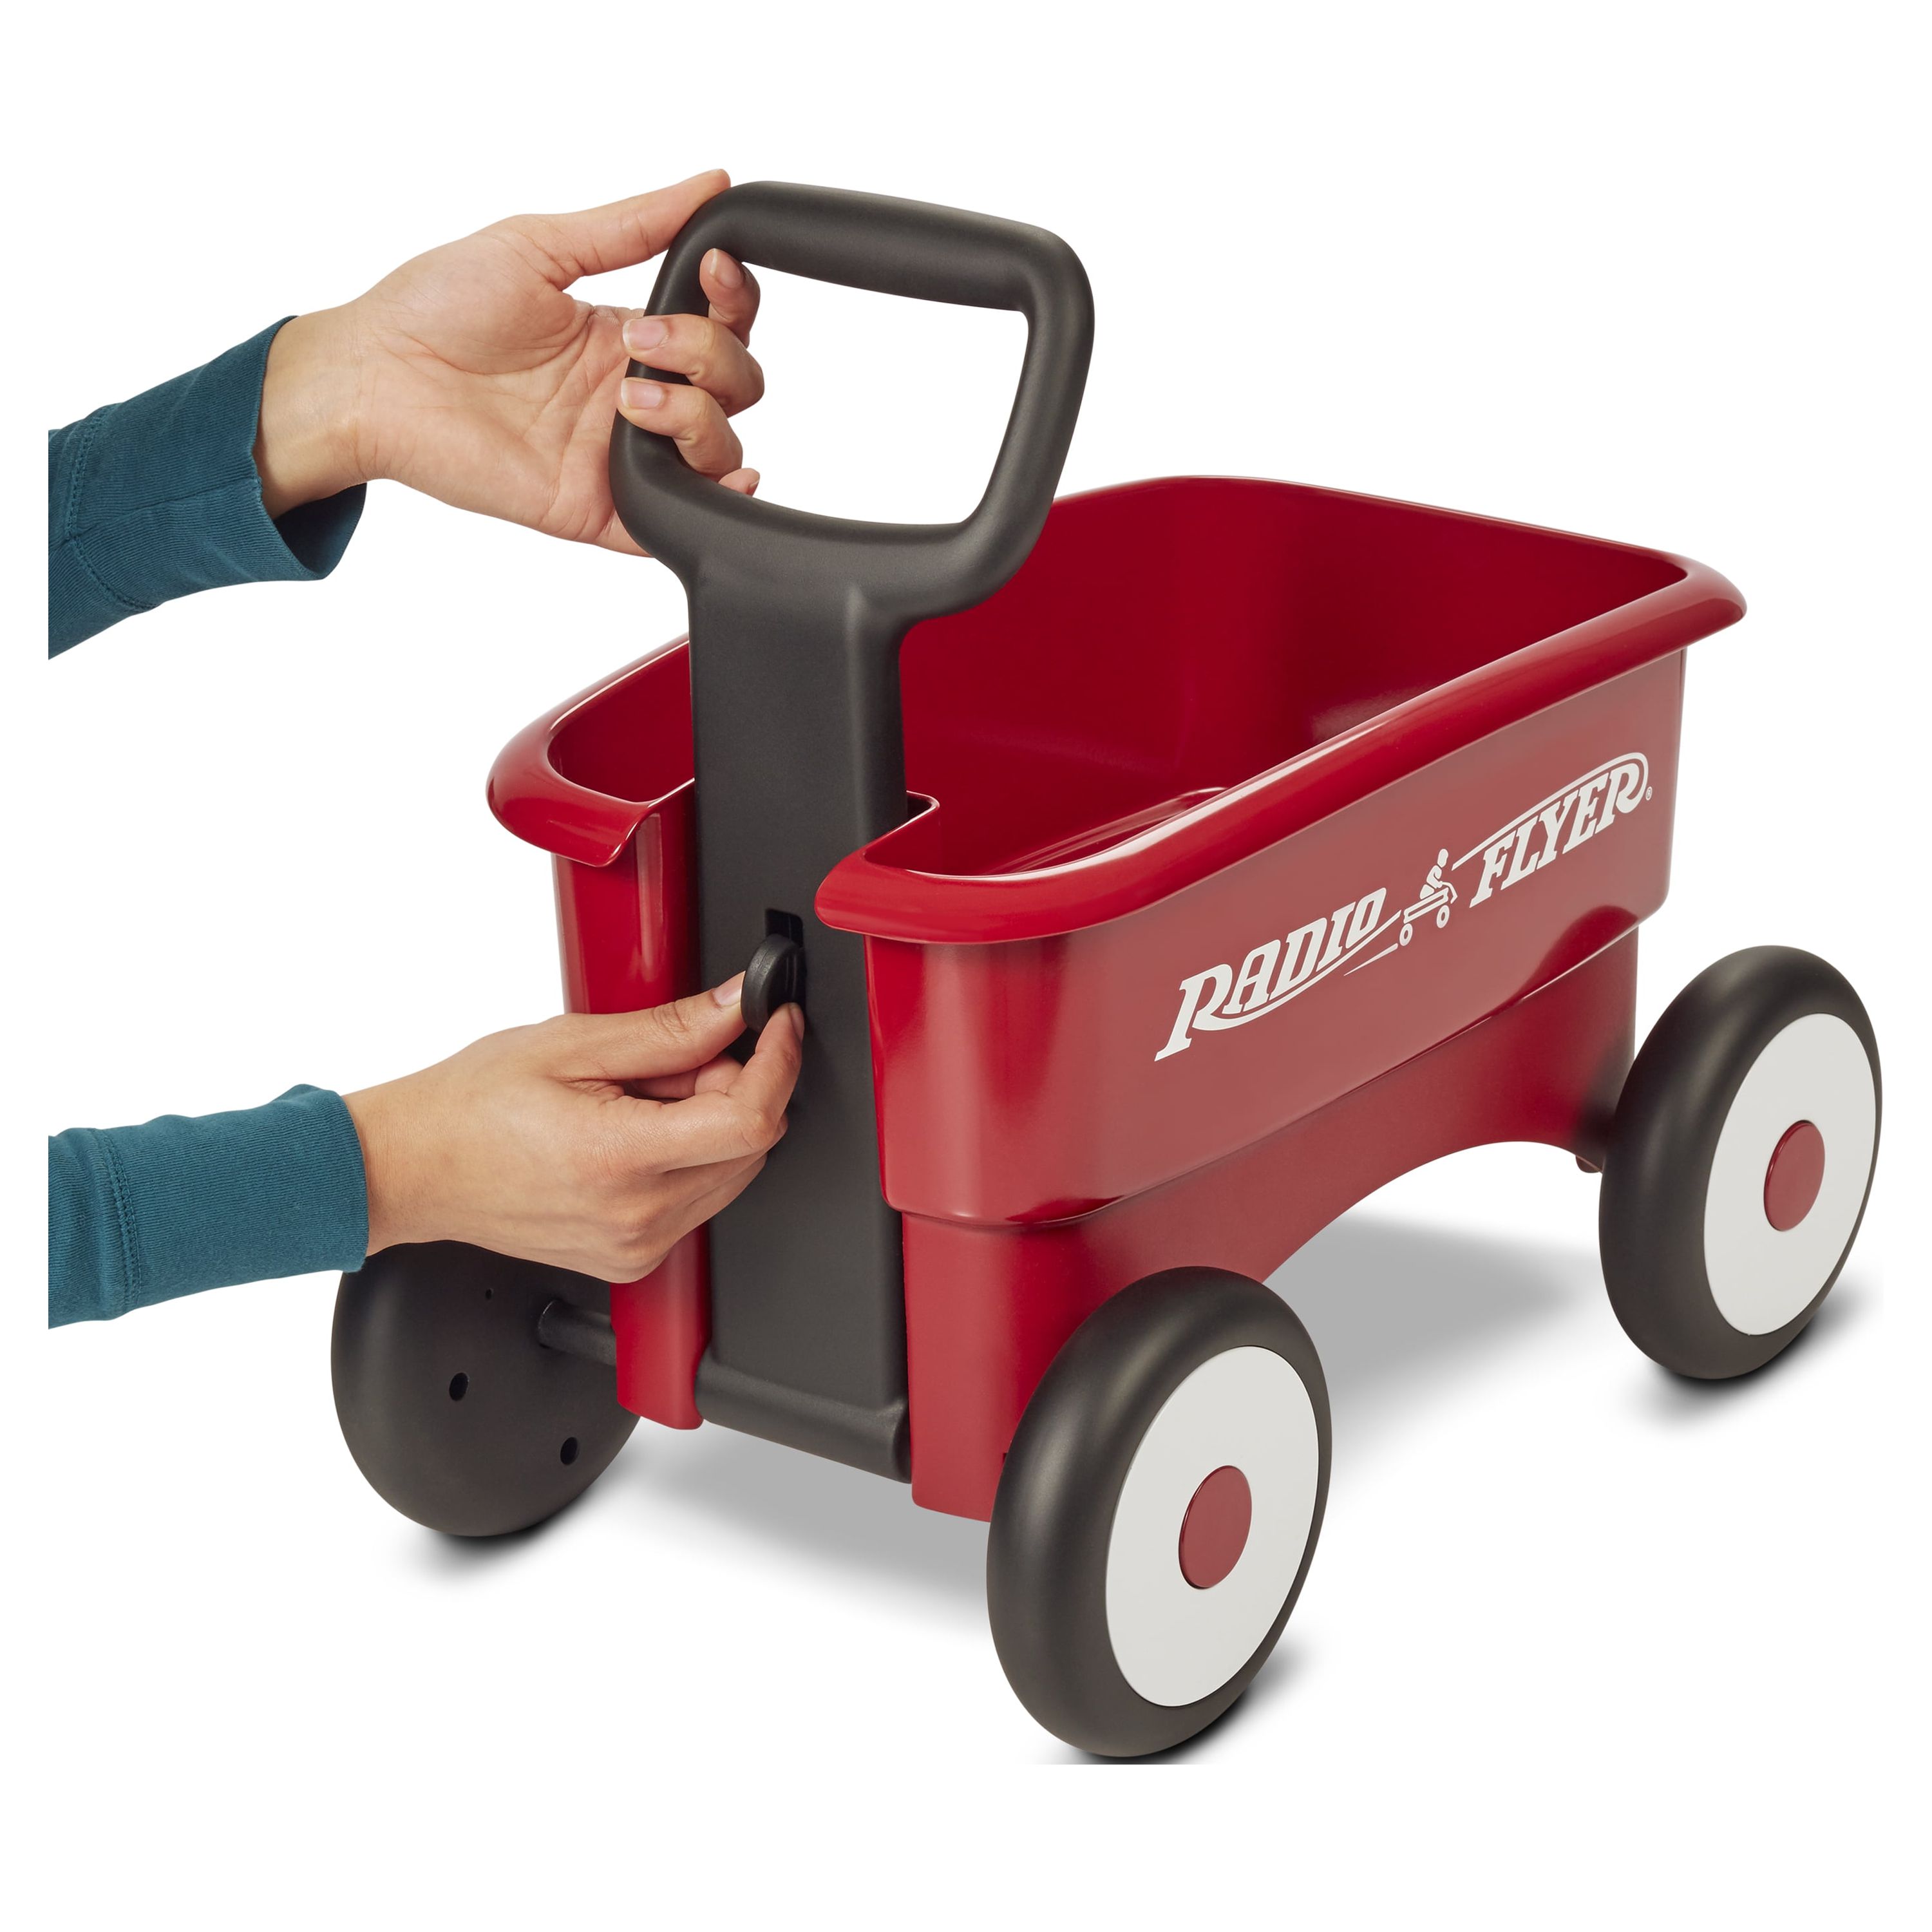 Radio Flyer, My 1st 2-in-1 Play Wagon Push Walker, Red - image 4 of 9